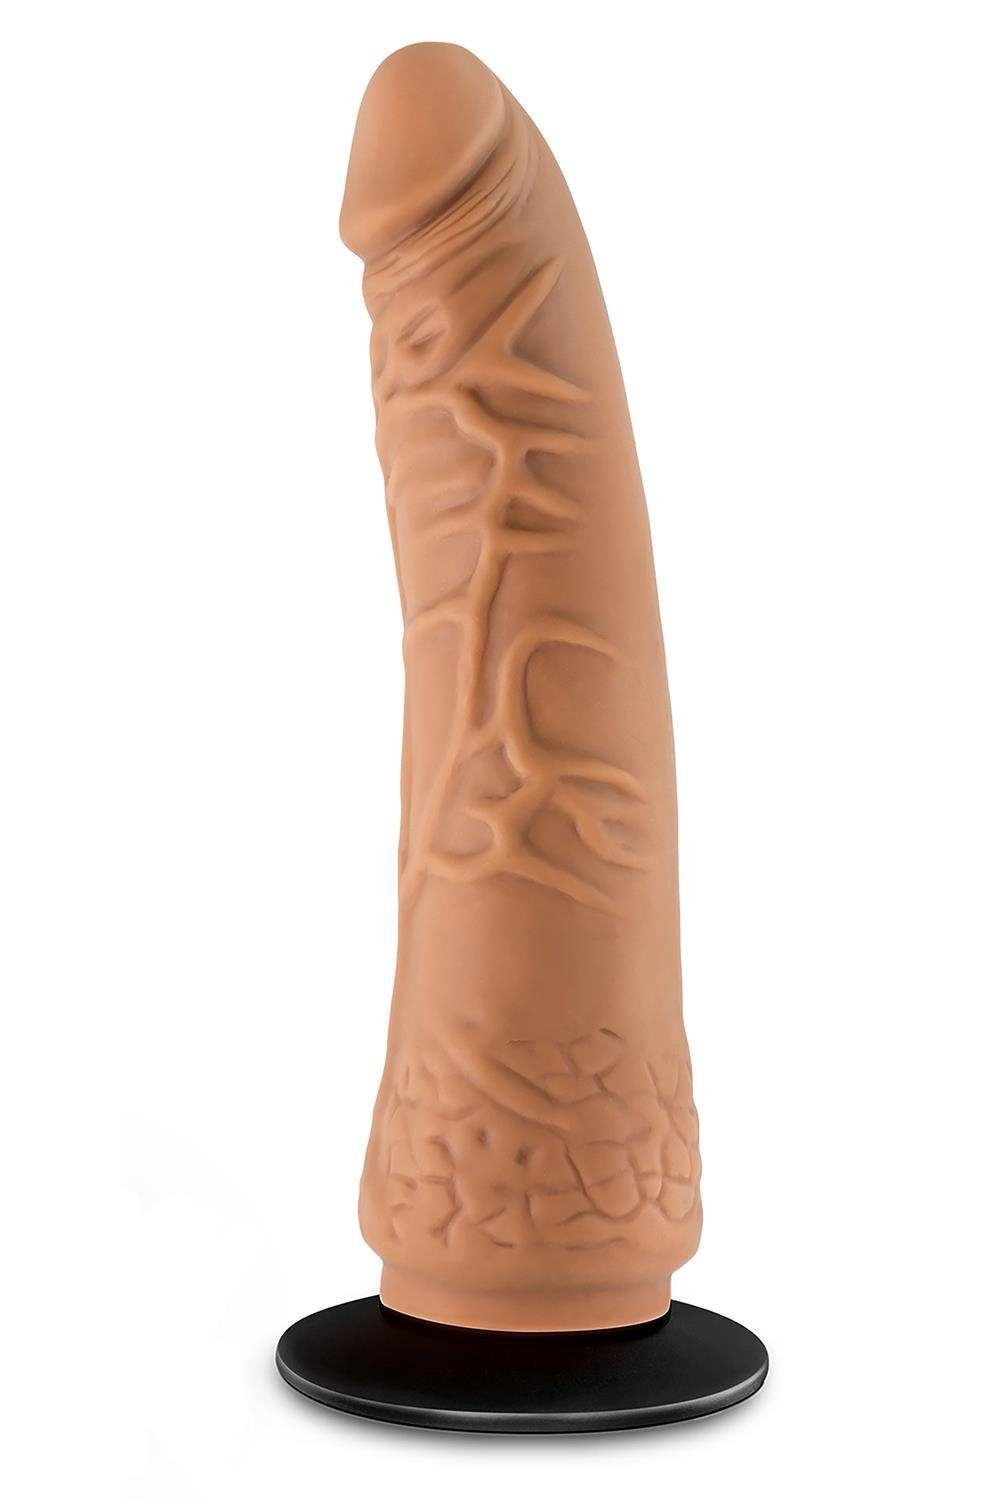 Suction Lock 19cm With Mocha Hexanite Cup Dildo Blush 7.5 On Dildo Adapter Inch